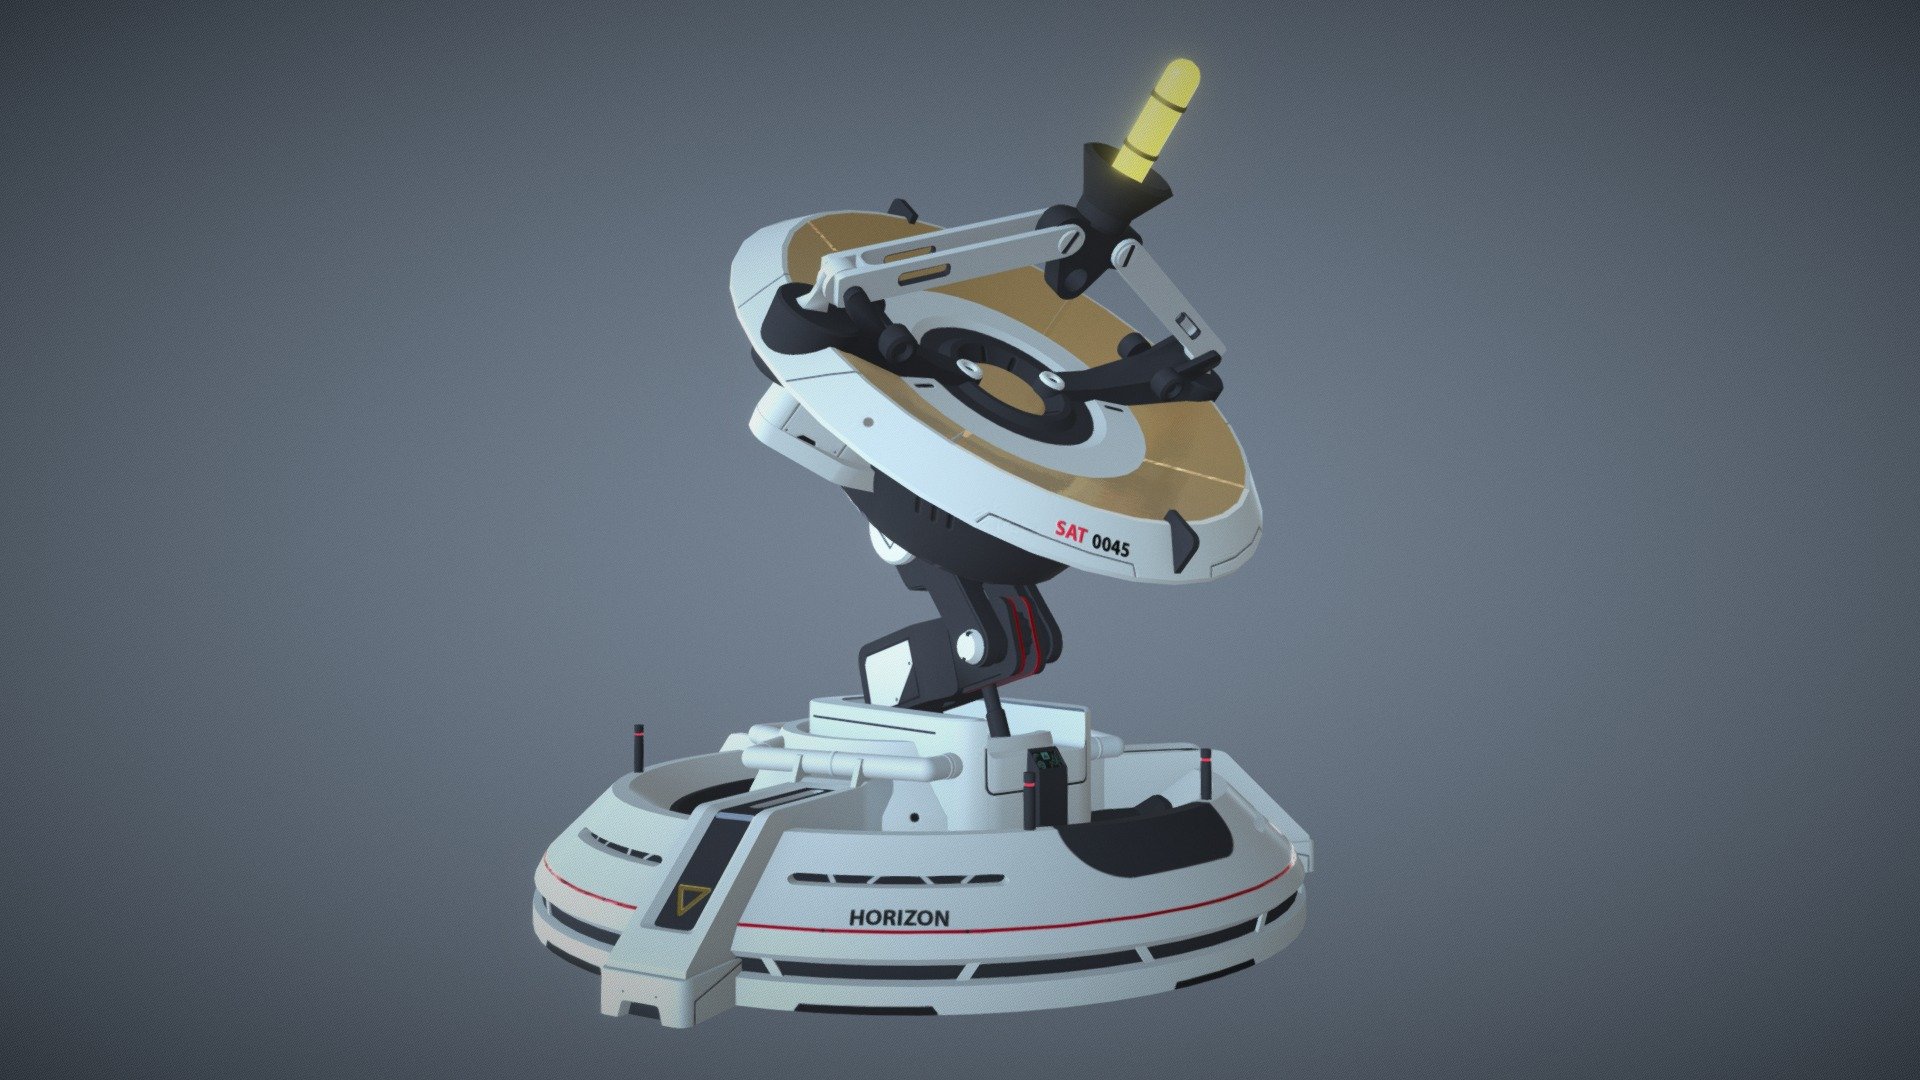 Hi guys. After a long pause, I present my new work.)
Concept by Oscar Cafaro. Thank you very much for the concept.) - Radar Overwatch - 3D model by IlyaRukhlyada 3d model